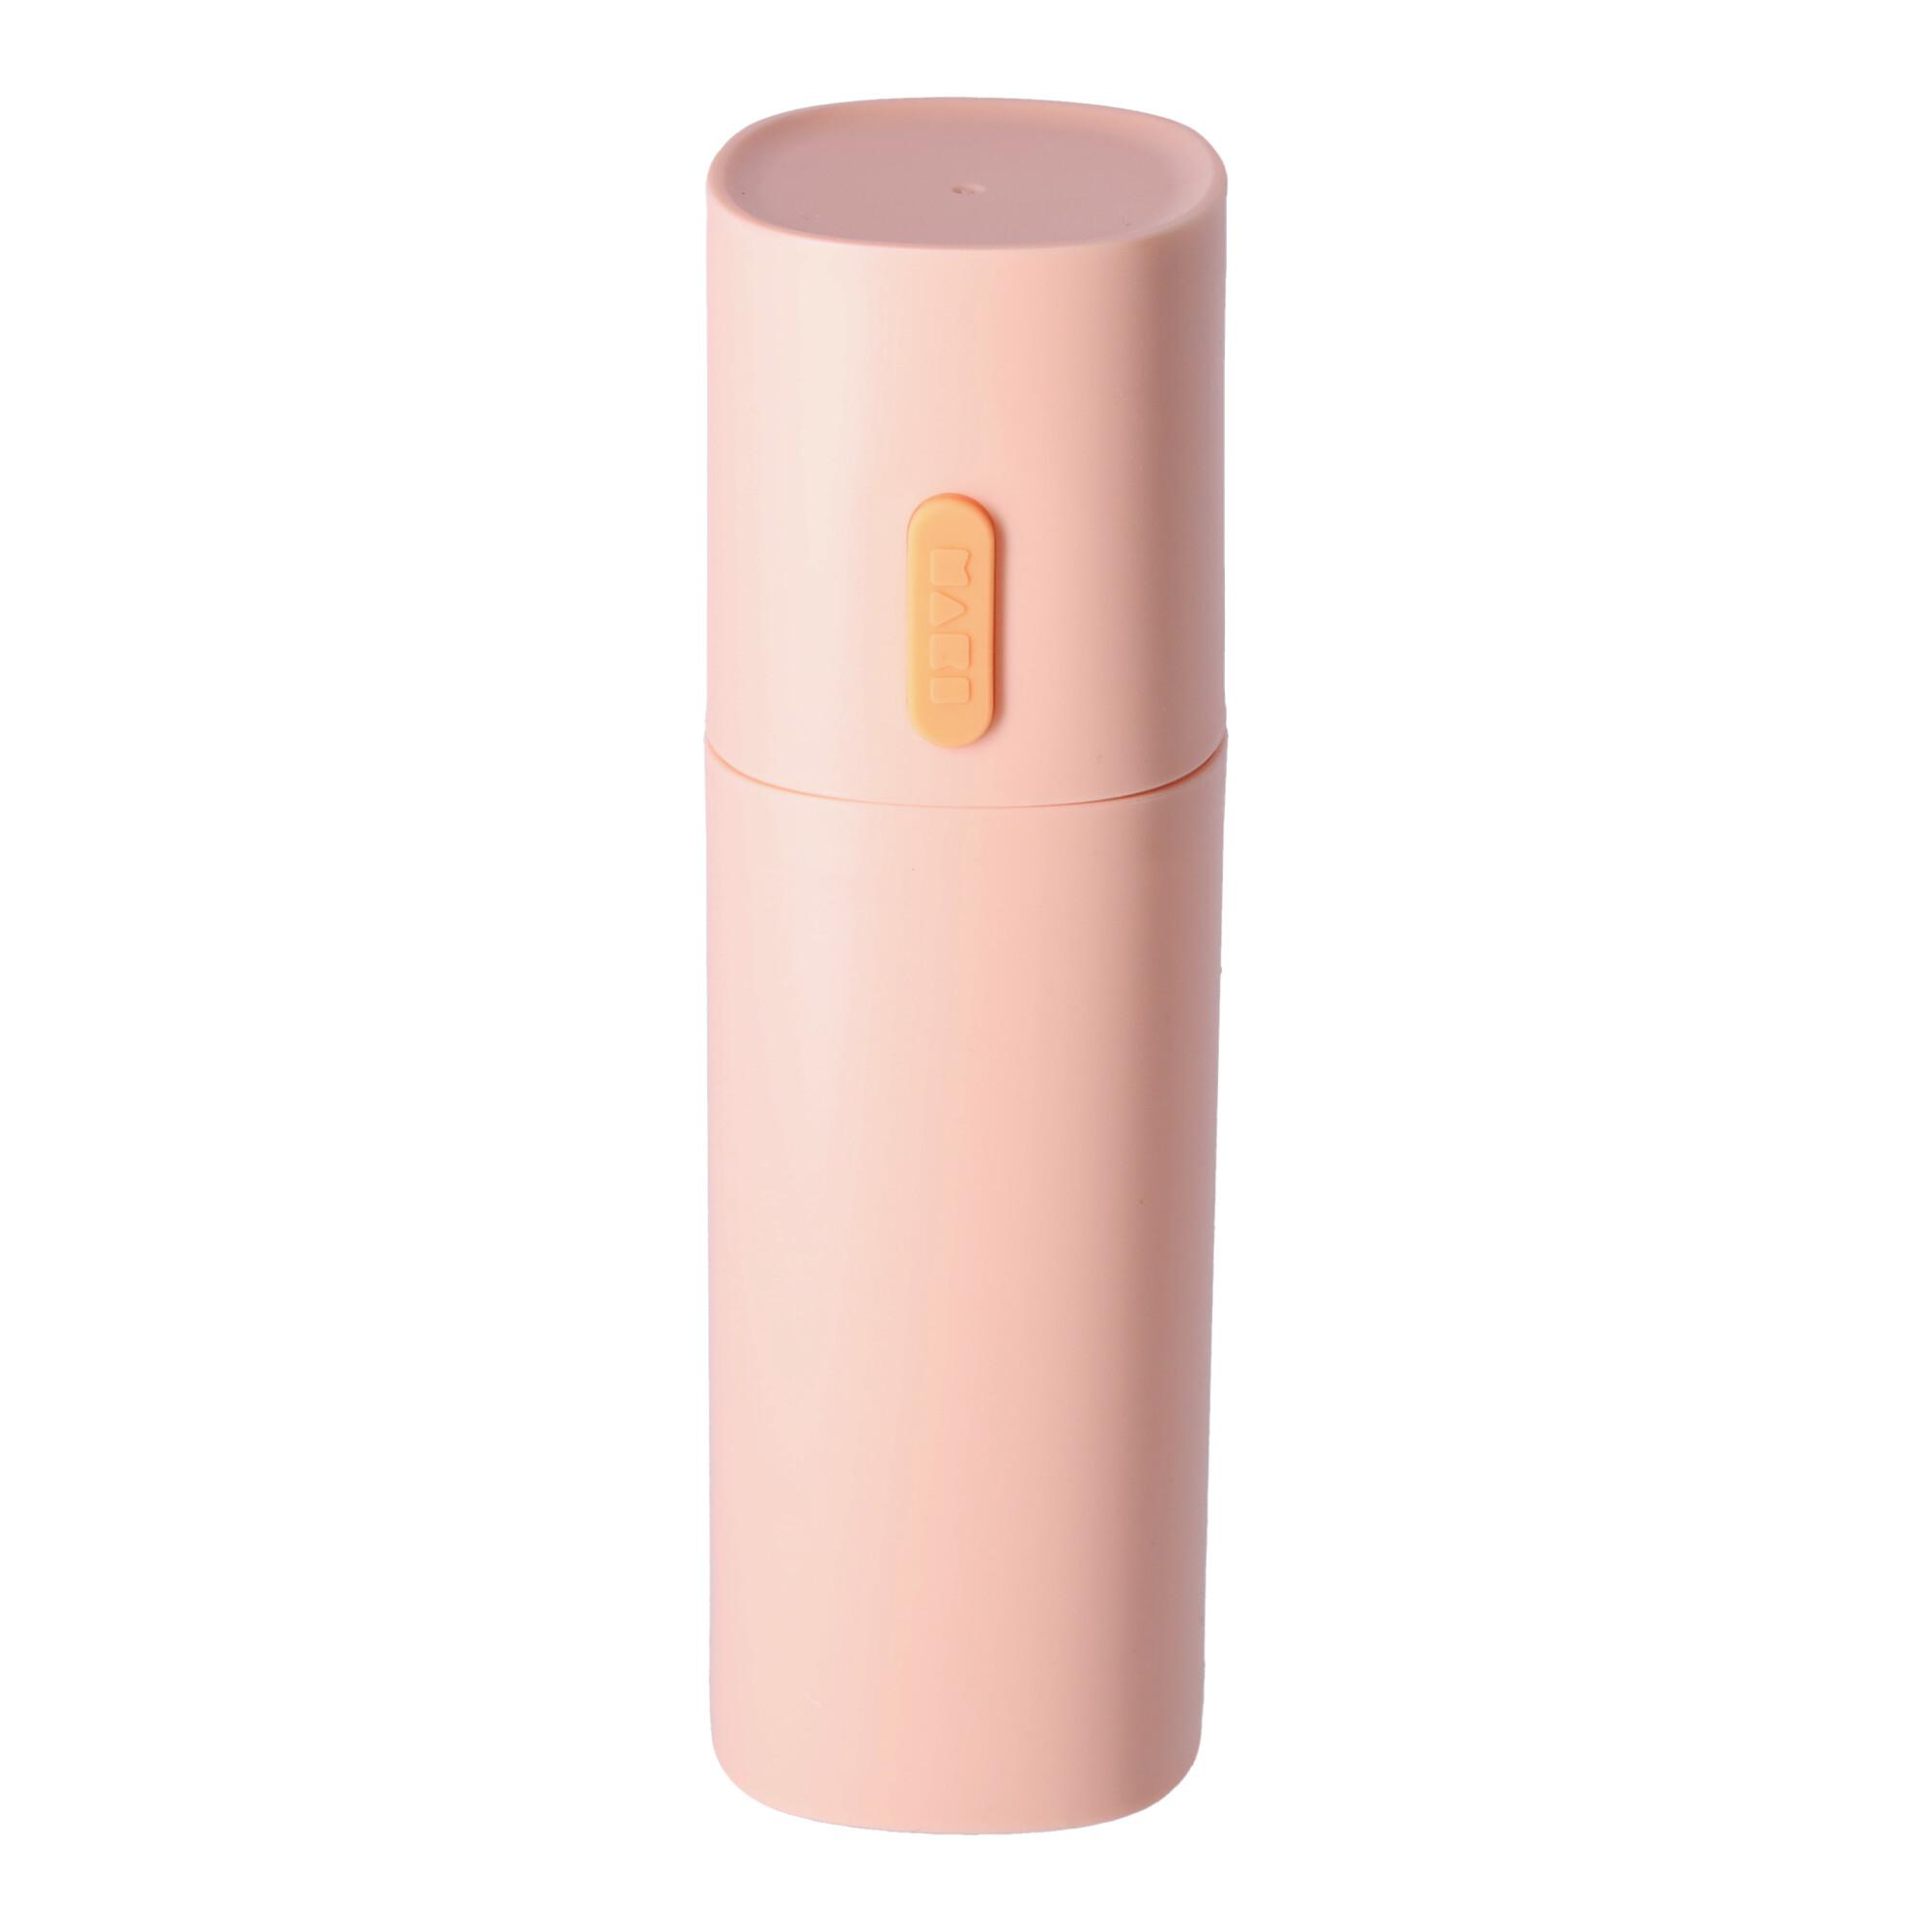 Container, case for toothbrush and toothpaste - pink